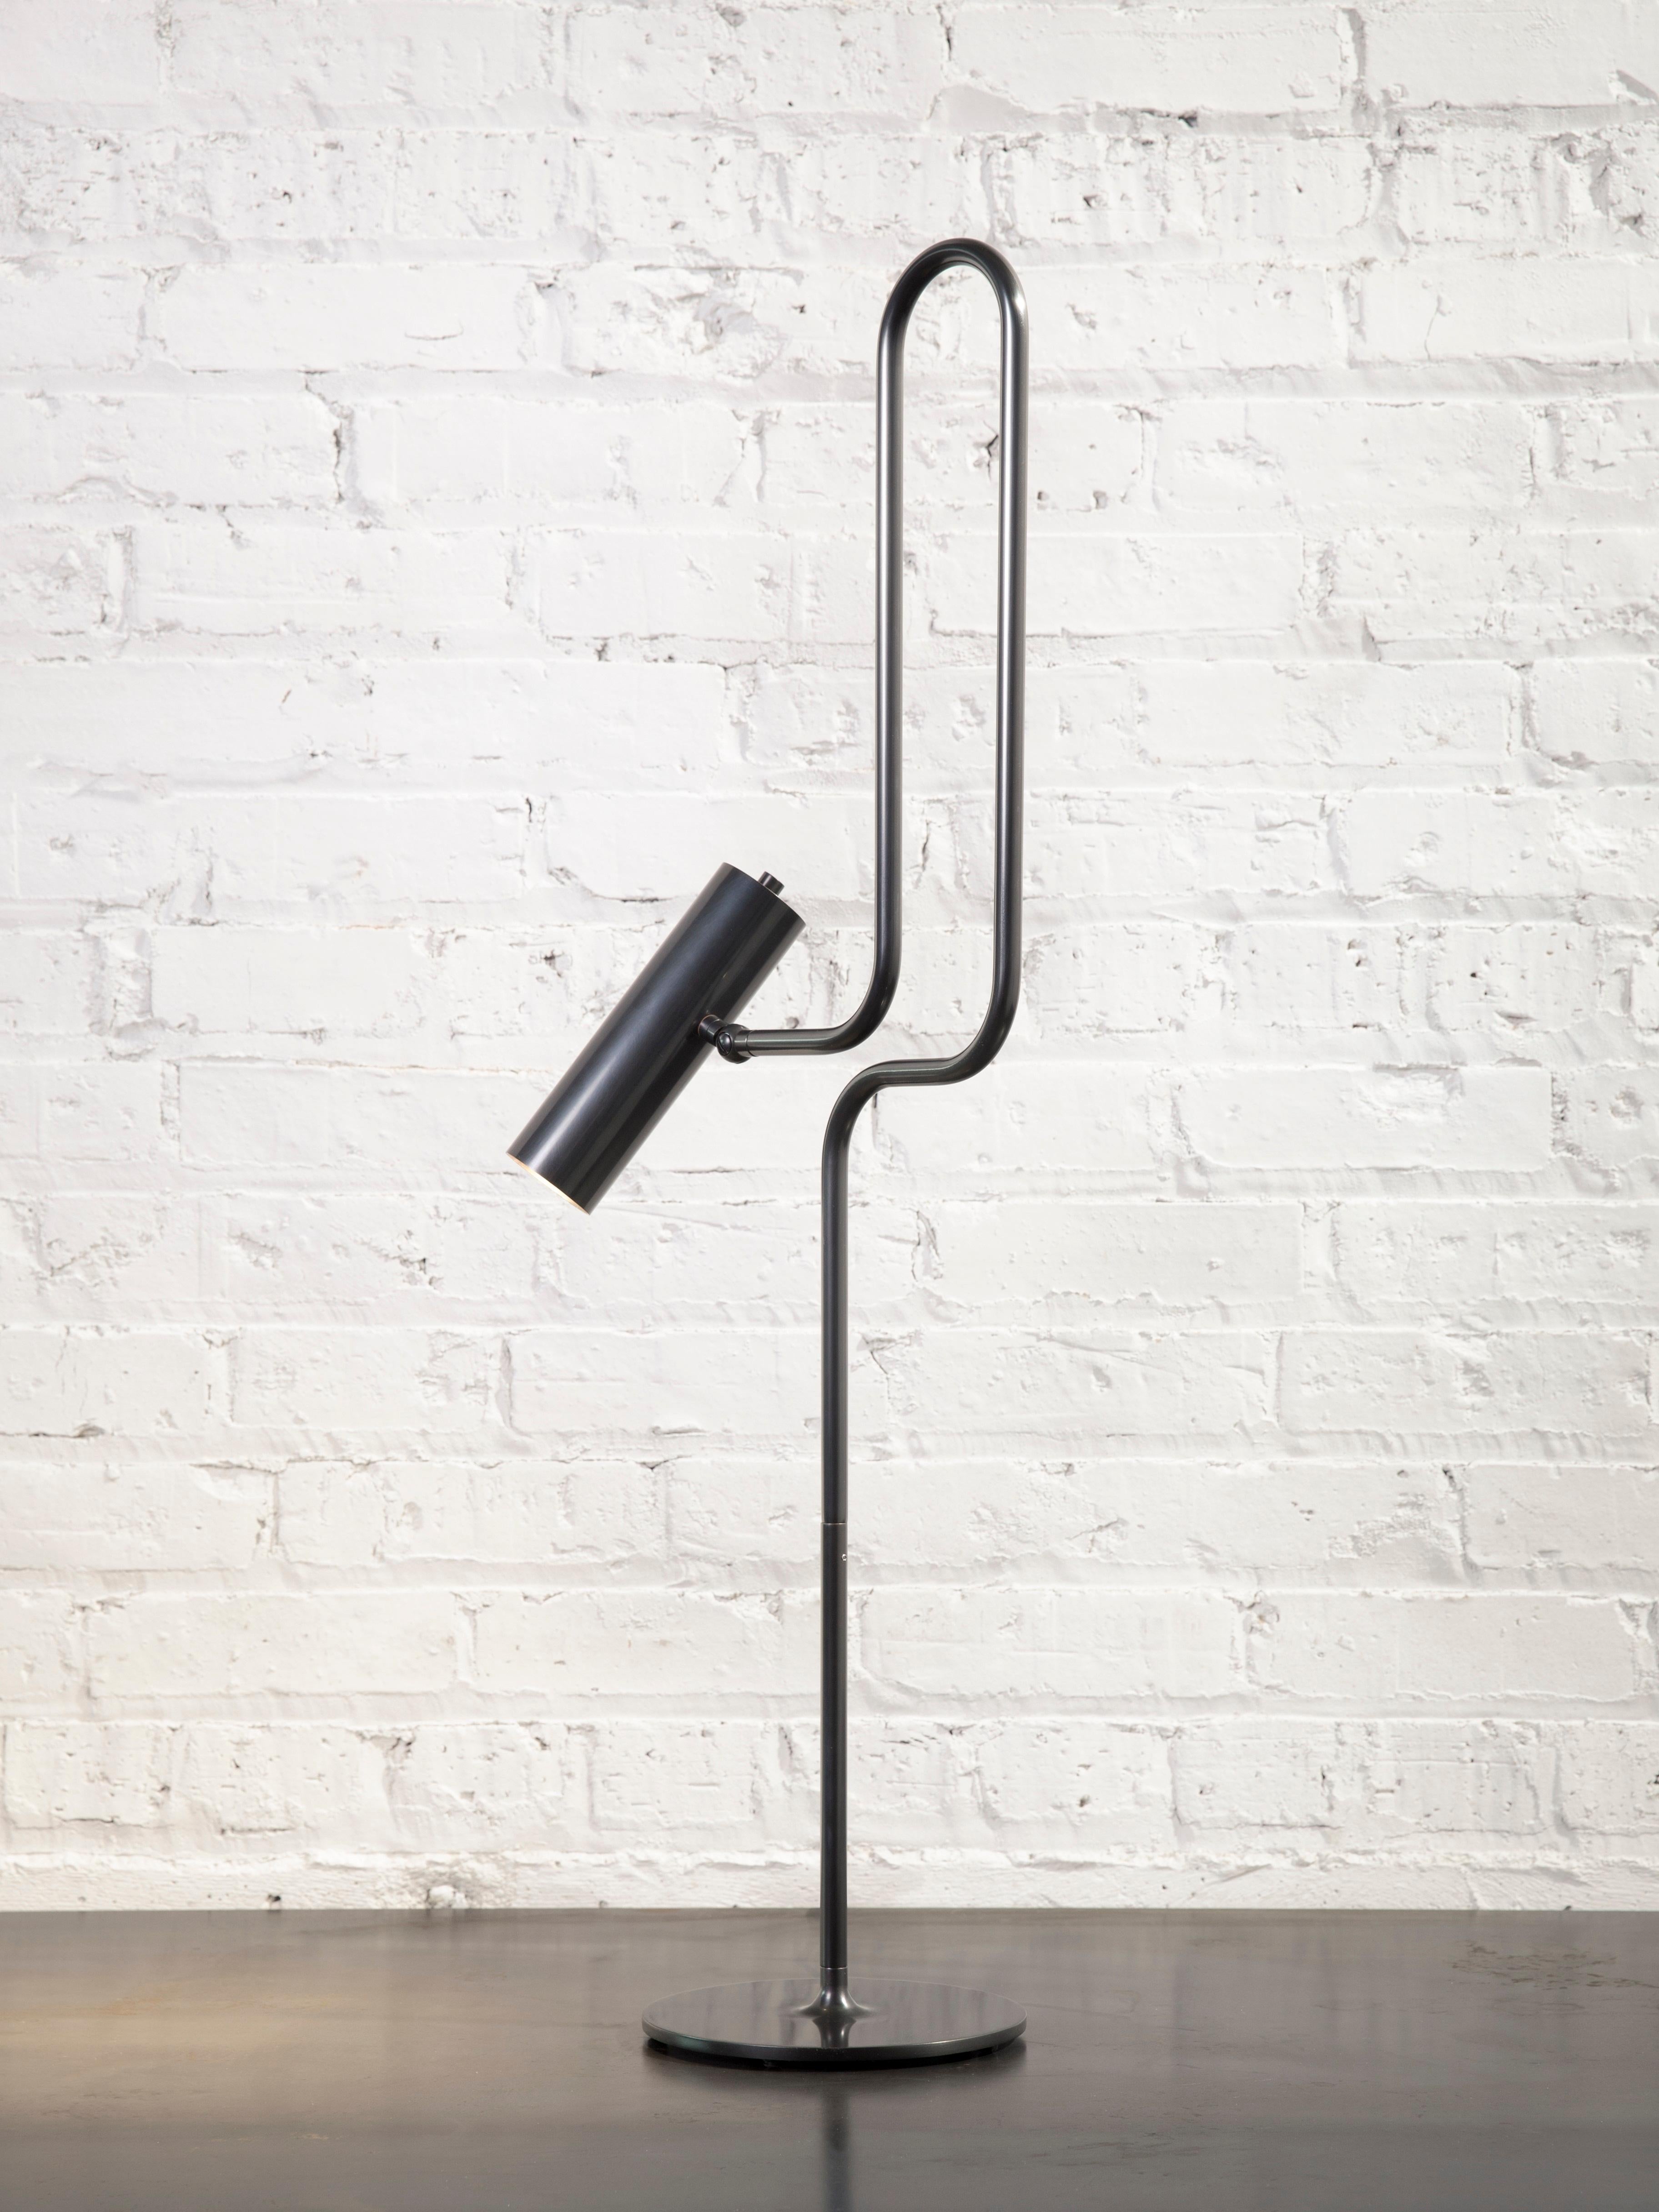 Pivot table lamp by Gentner Design
Dimensions: D 15.6 x W 30.7 x H 78.7 cm
Materials: darkened brass
Available in polished tarnished brass, darkened brass and hand rubbed brass.

All our lamps can be wired according to each country. If sold to